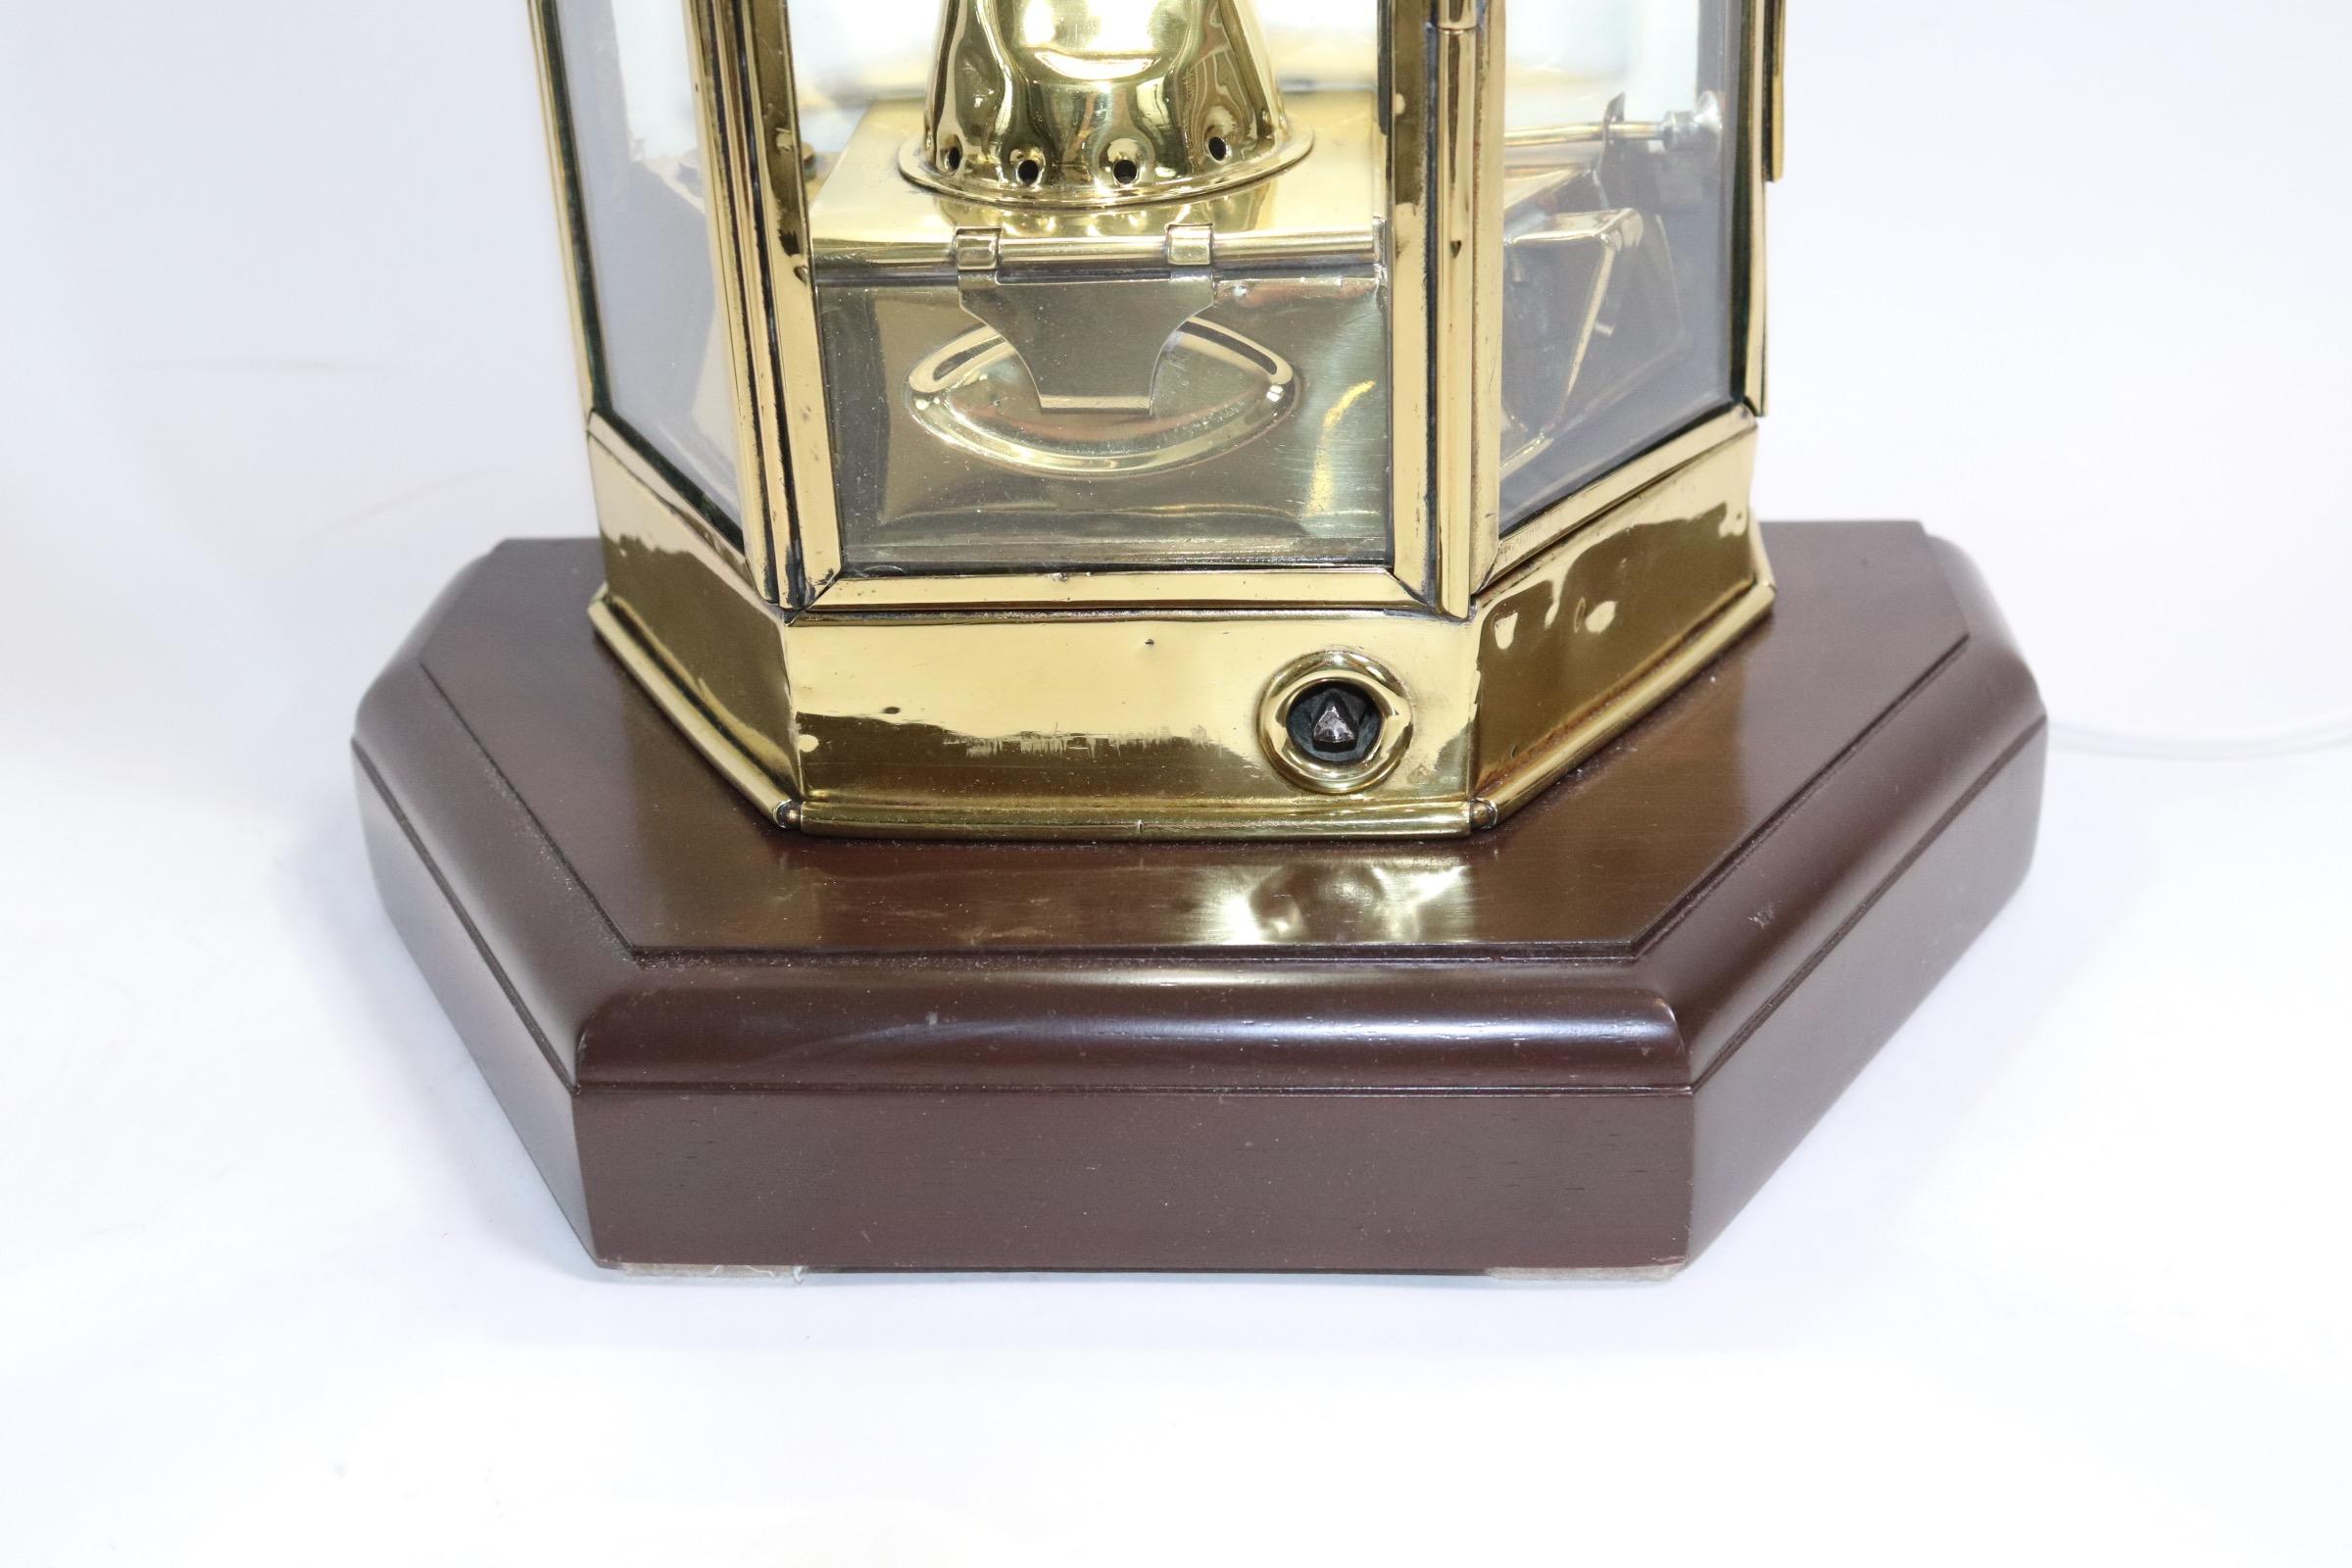 Polished and lacquered ships cabin lantern with three glass windows, hinged door, mounted to a thick wood base with rich dark finish. Lantern retains its original burner and is electrified from above for home use. Some dents and dings. Weight is 13